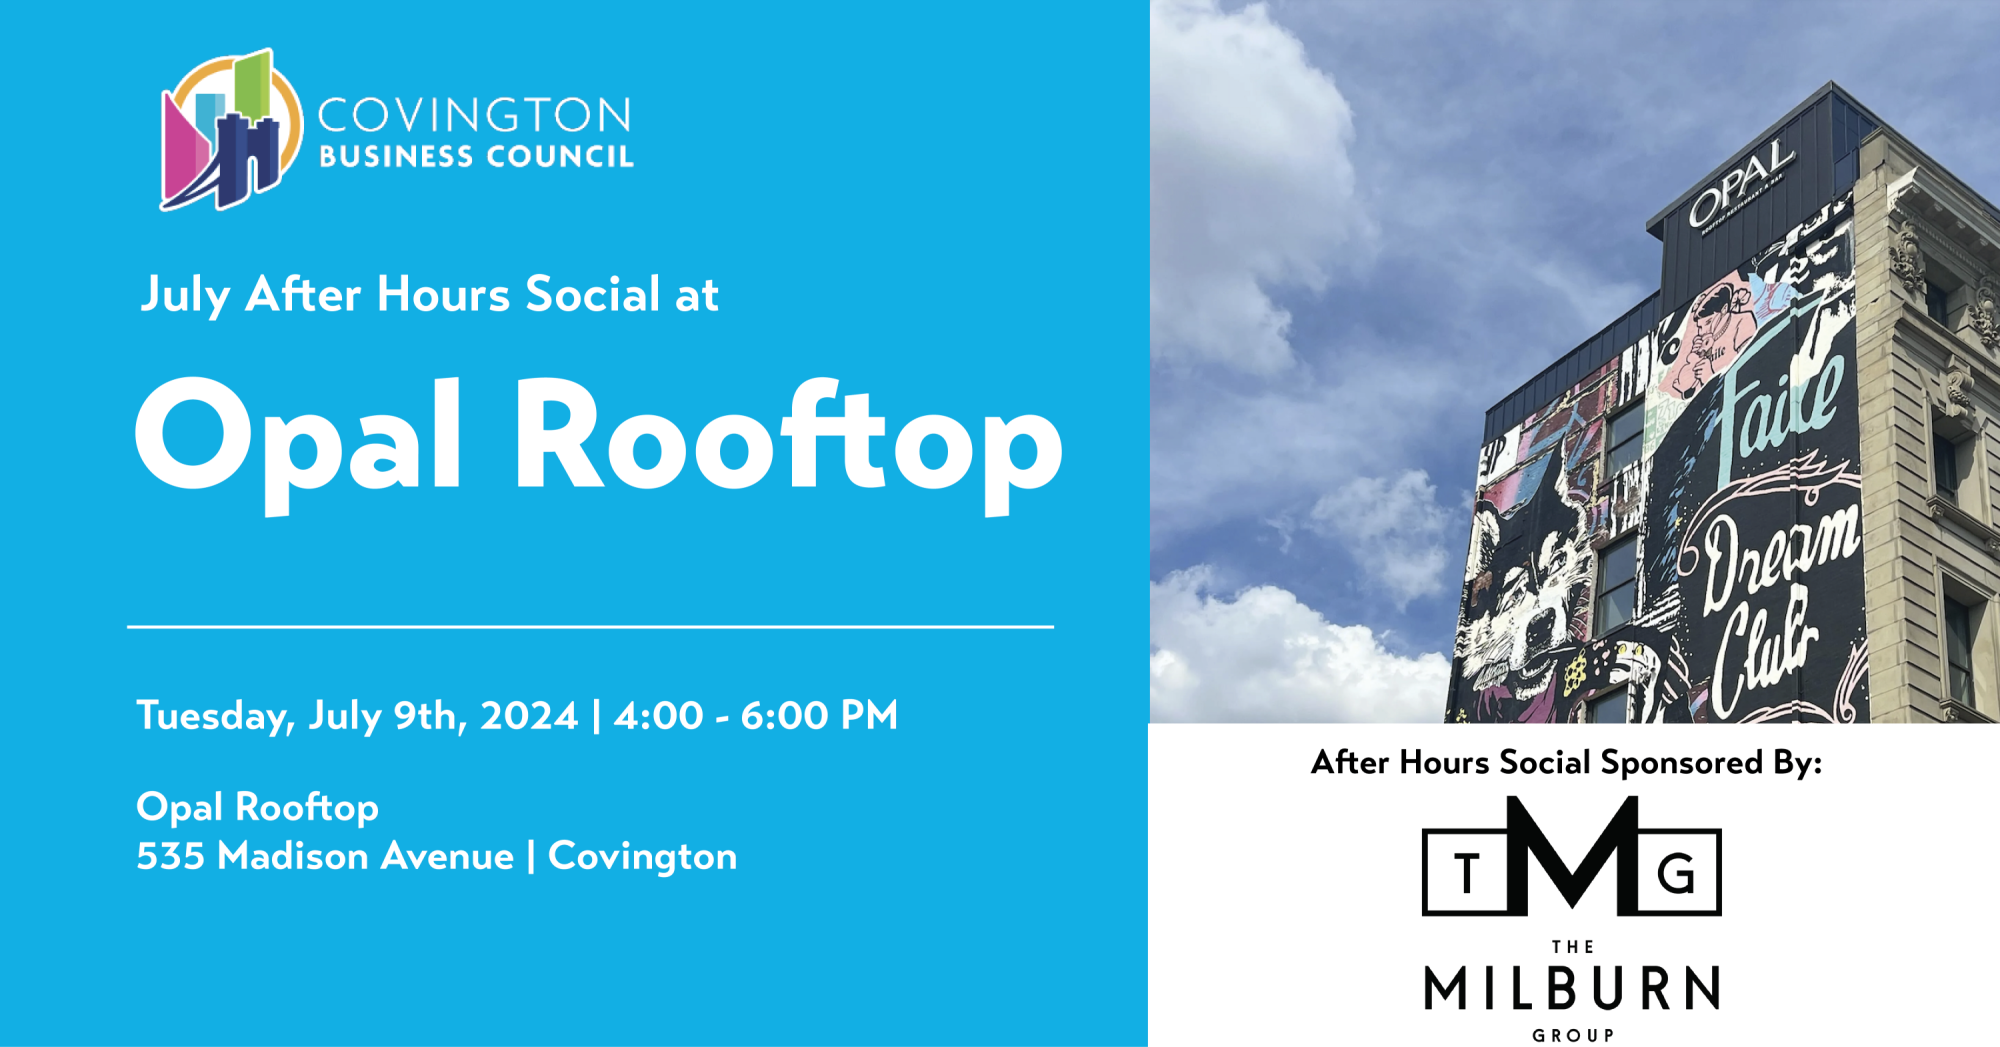 July After Hours Social at Opal Rooftop Covington Business Council